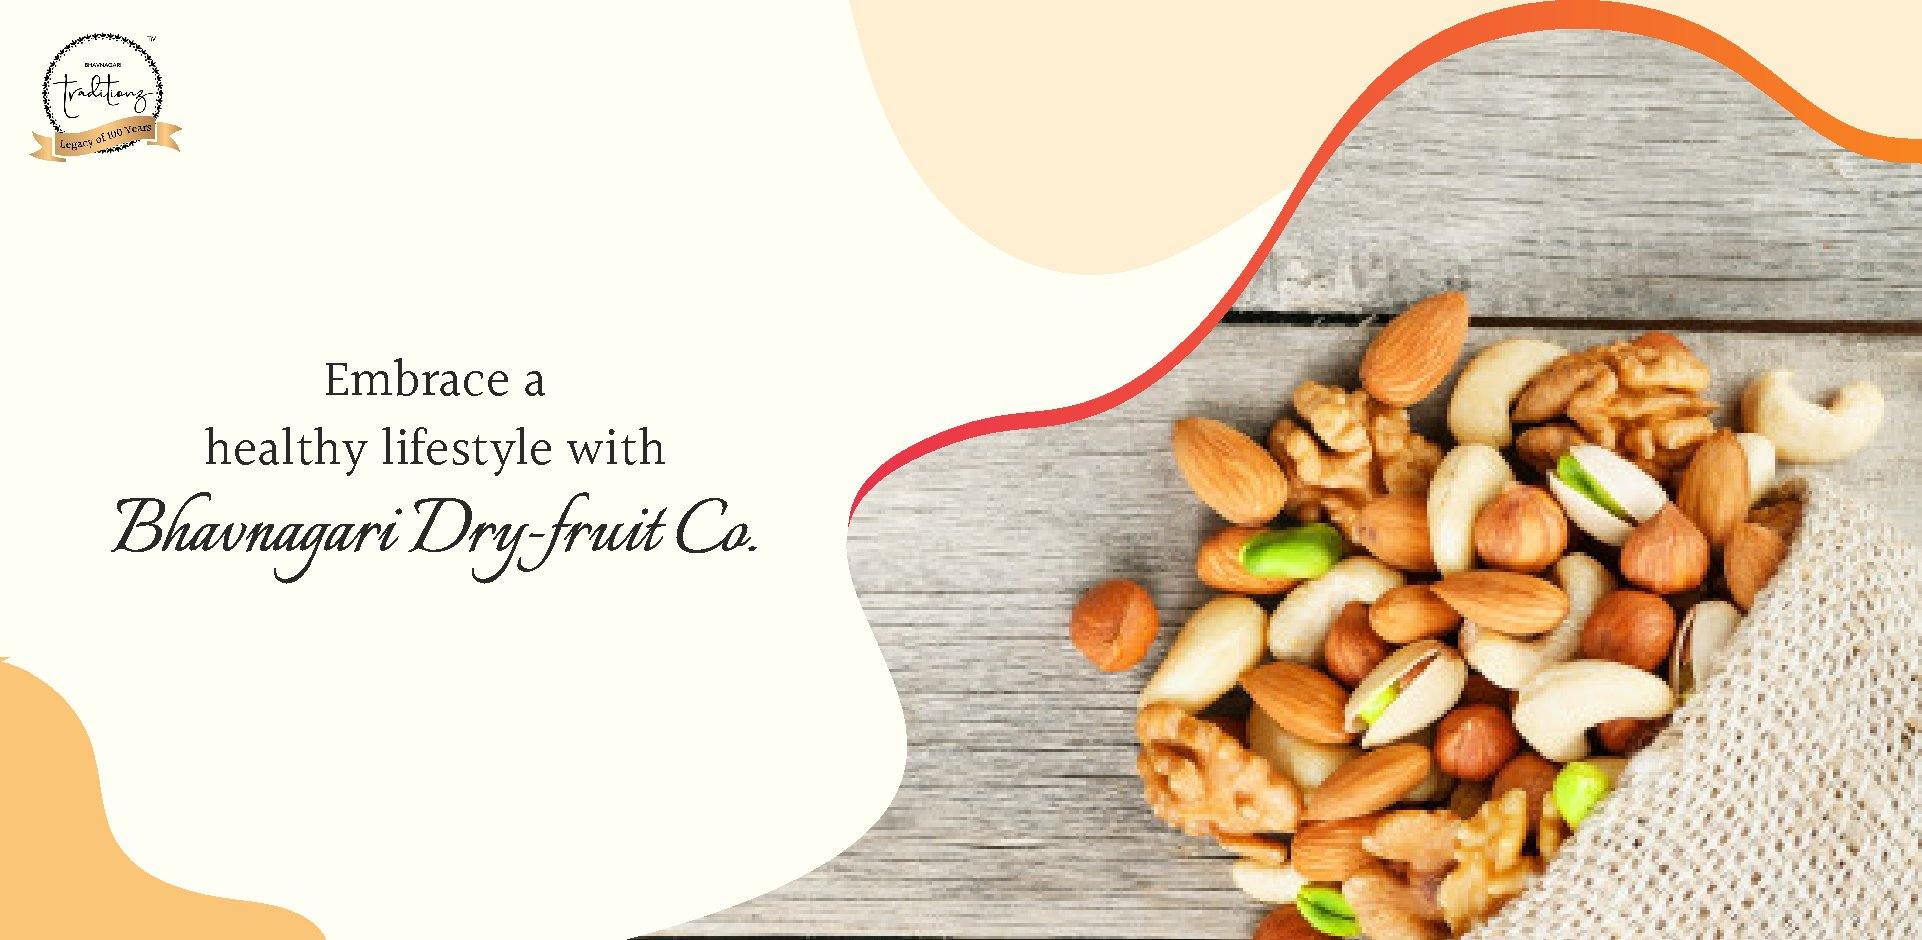 Dry Fruits - The New Way to Healthy Living